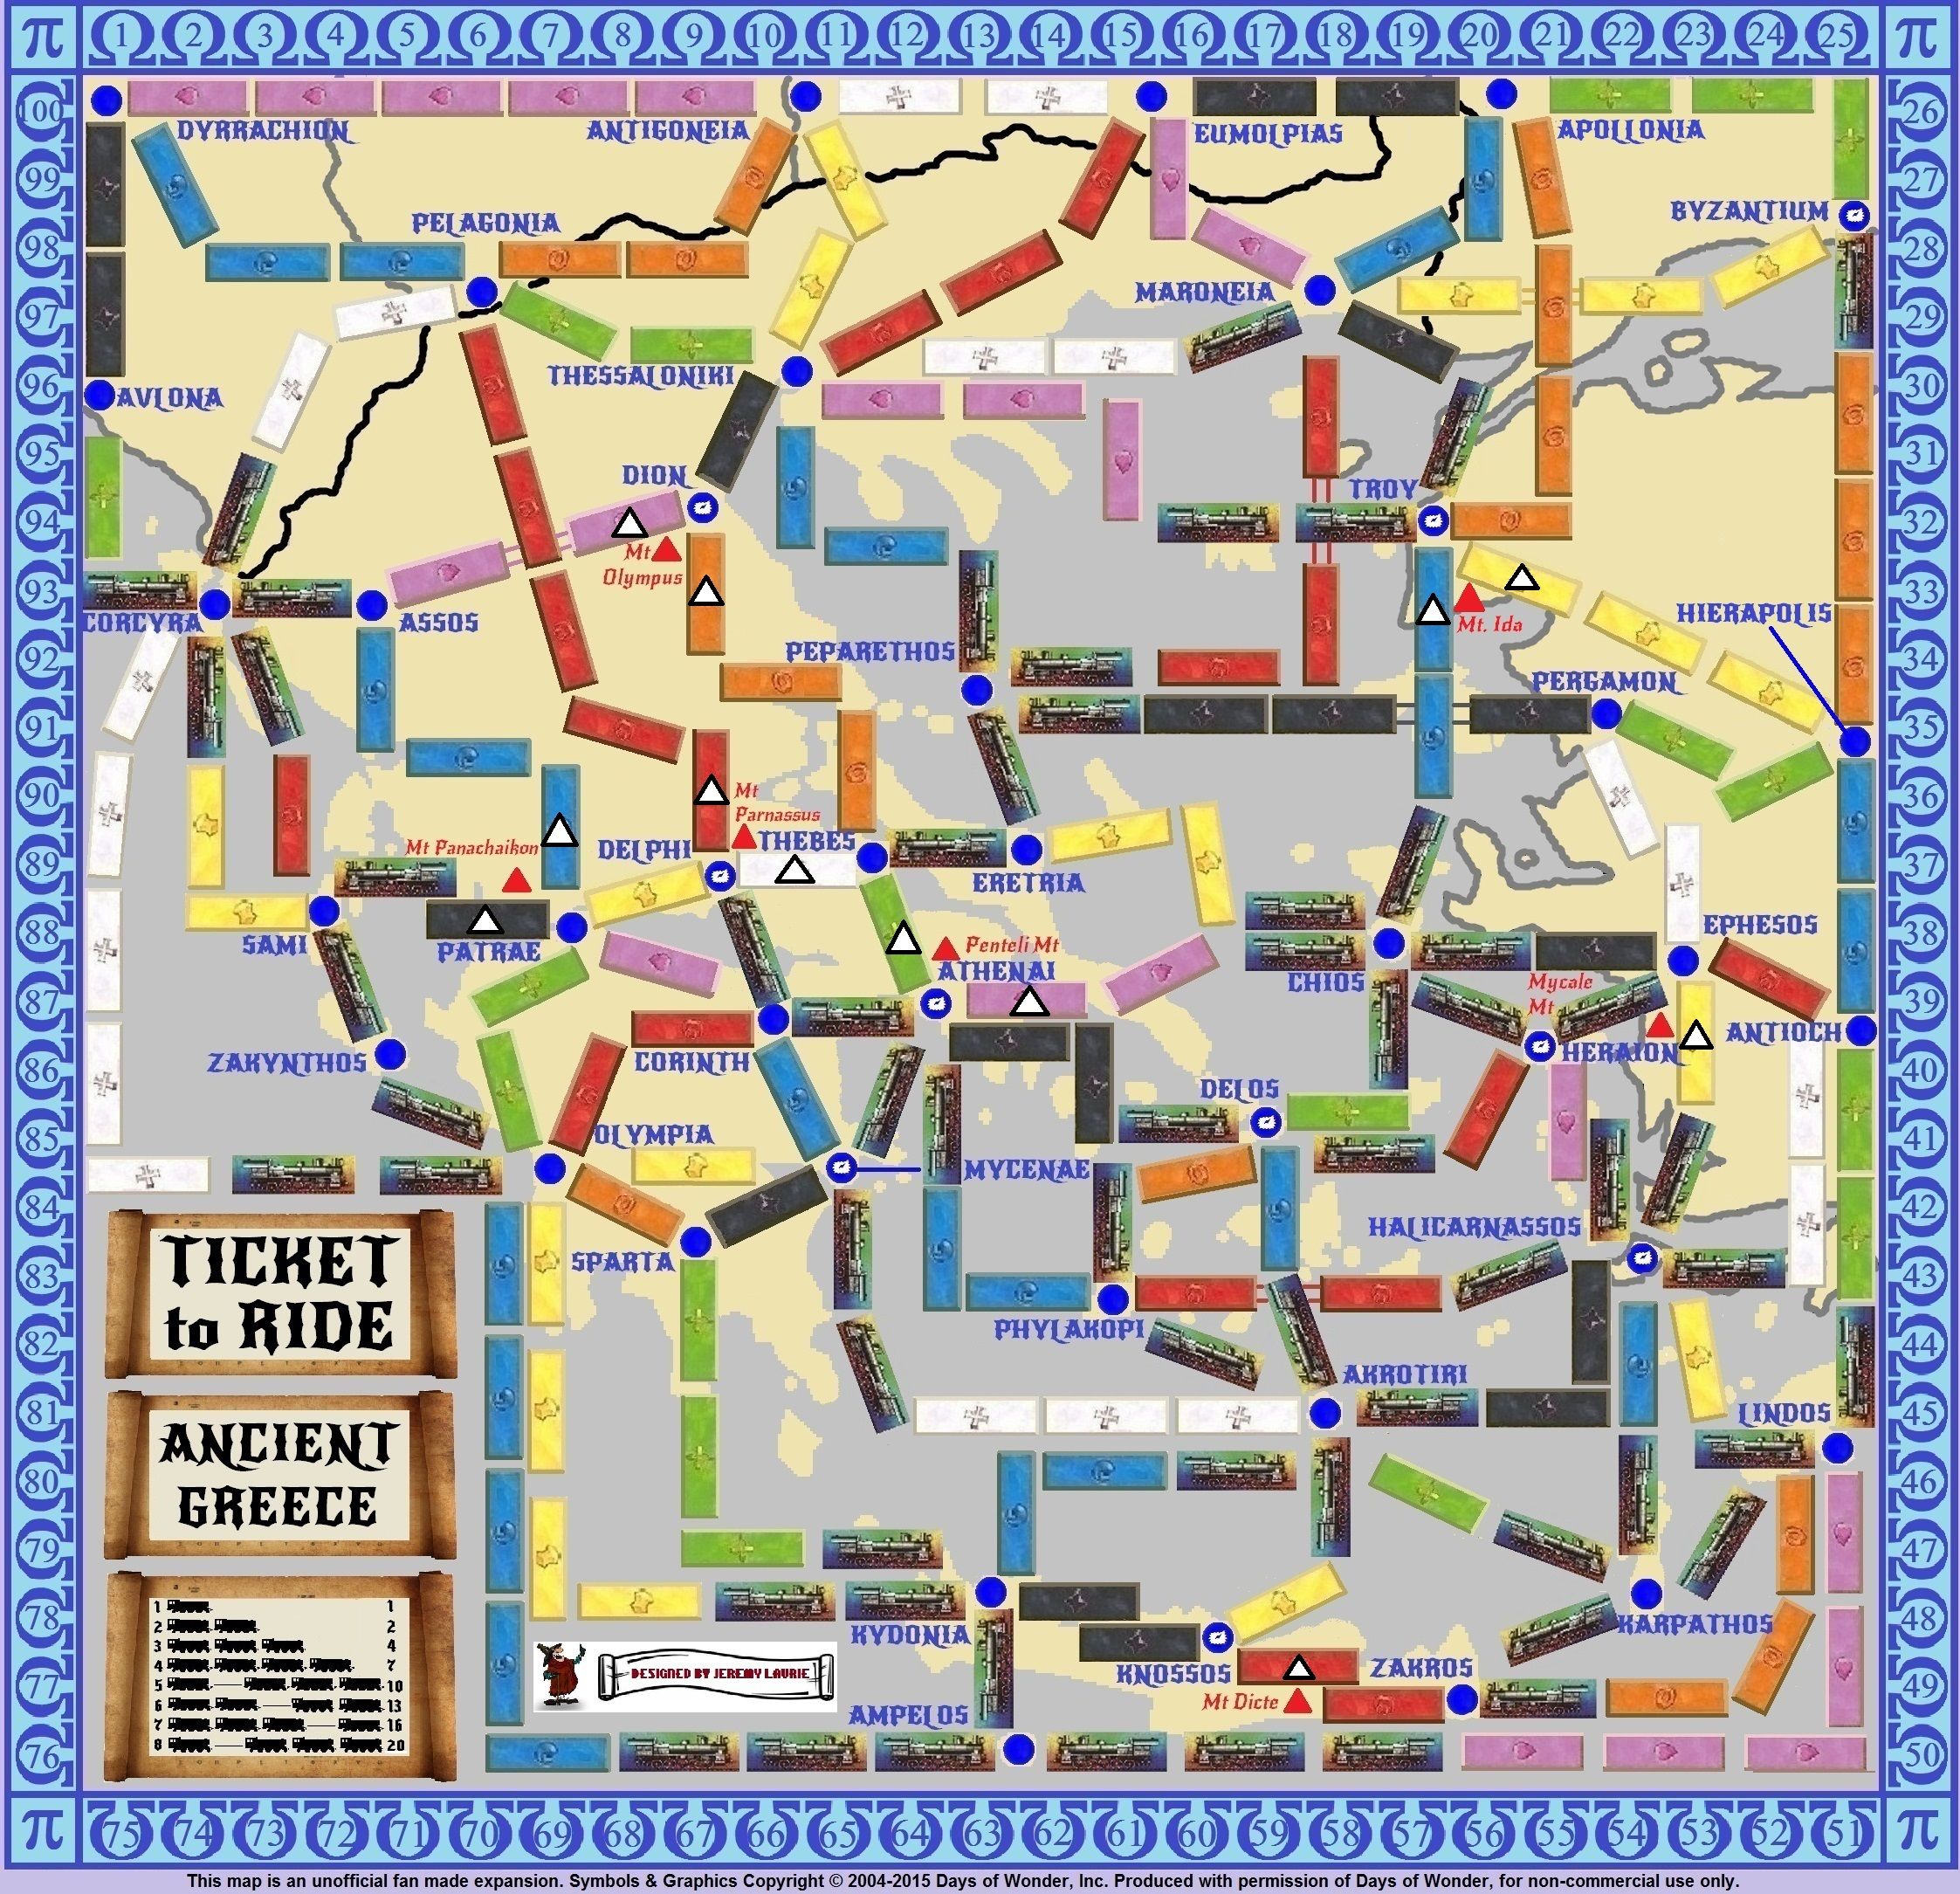 Ancient Greece (fan expansion for Ticket to Ride)